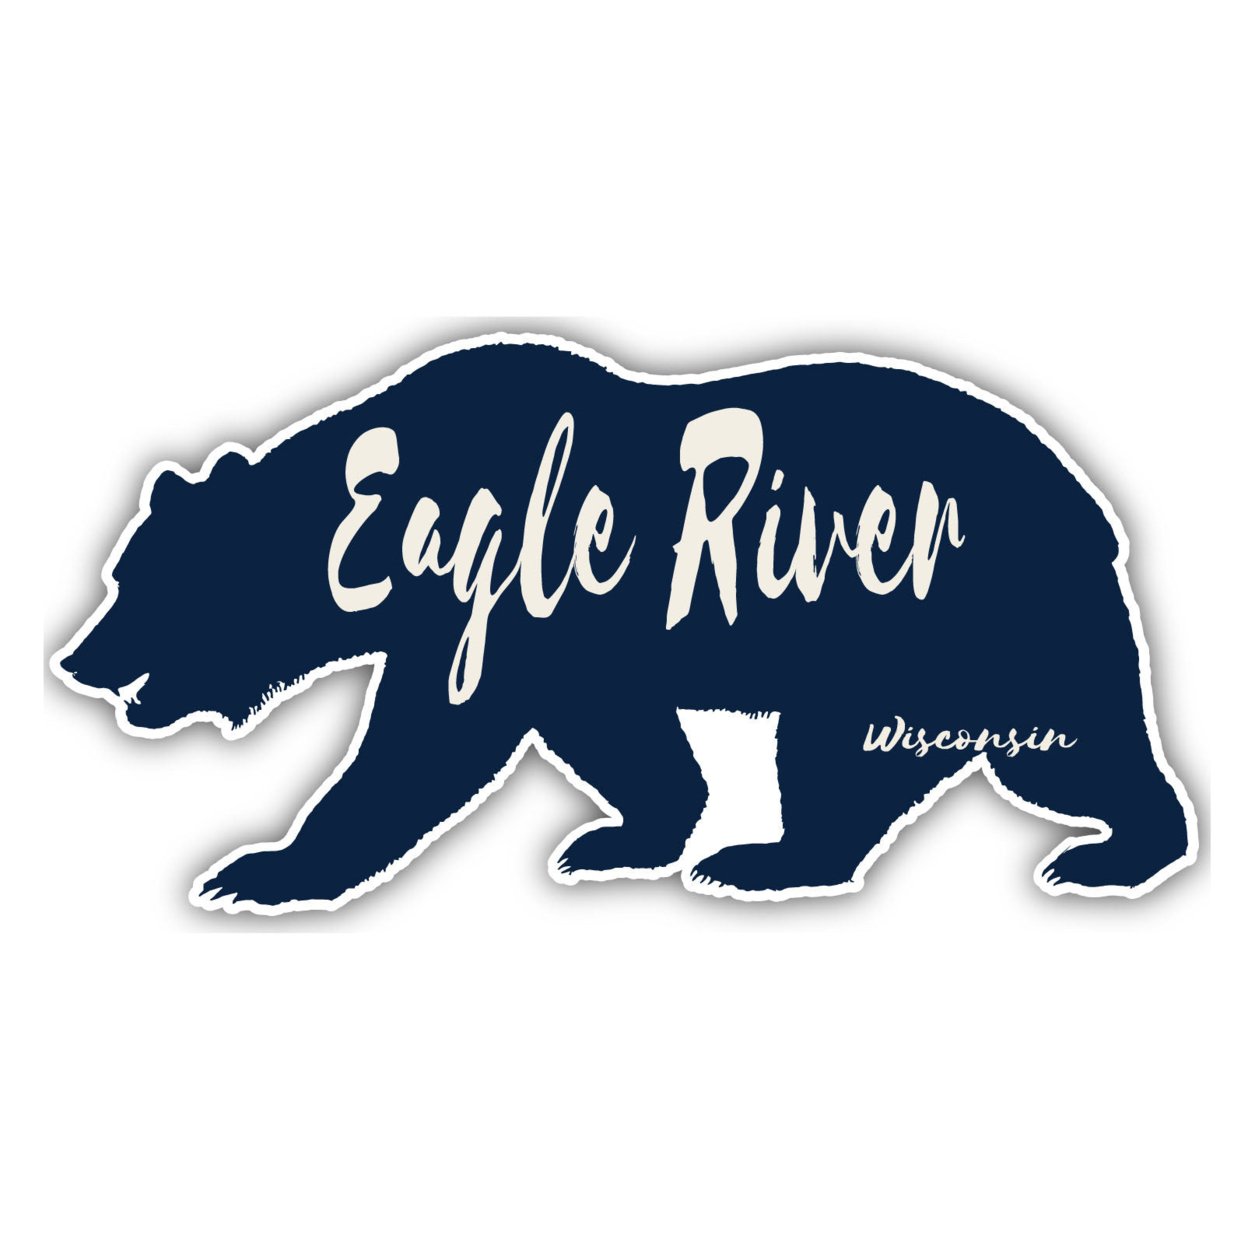 Eagle River Wisconsin Souvenir Decorative Stickers (Choose Theme And Size) - 4-Pack, 2-Inch, Bear